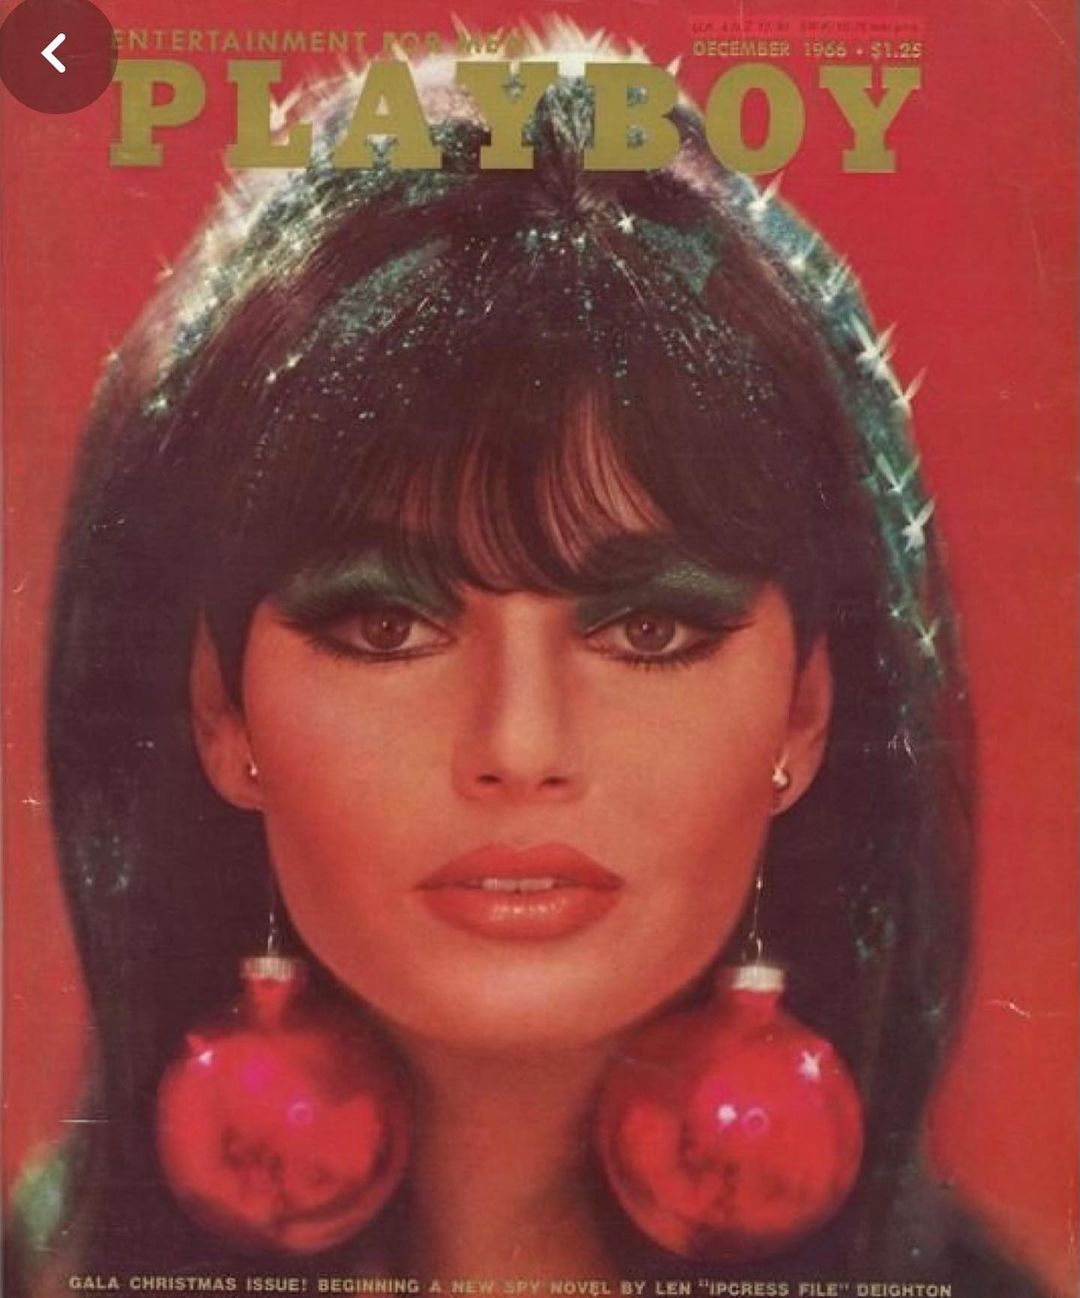 'Playboy' cover